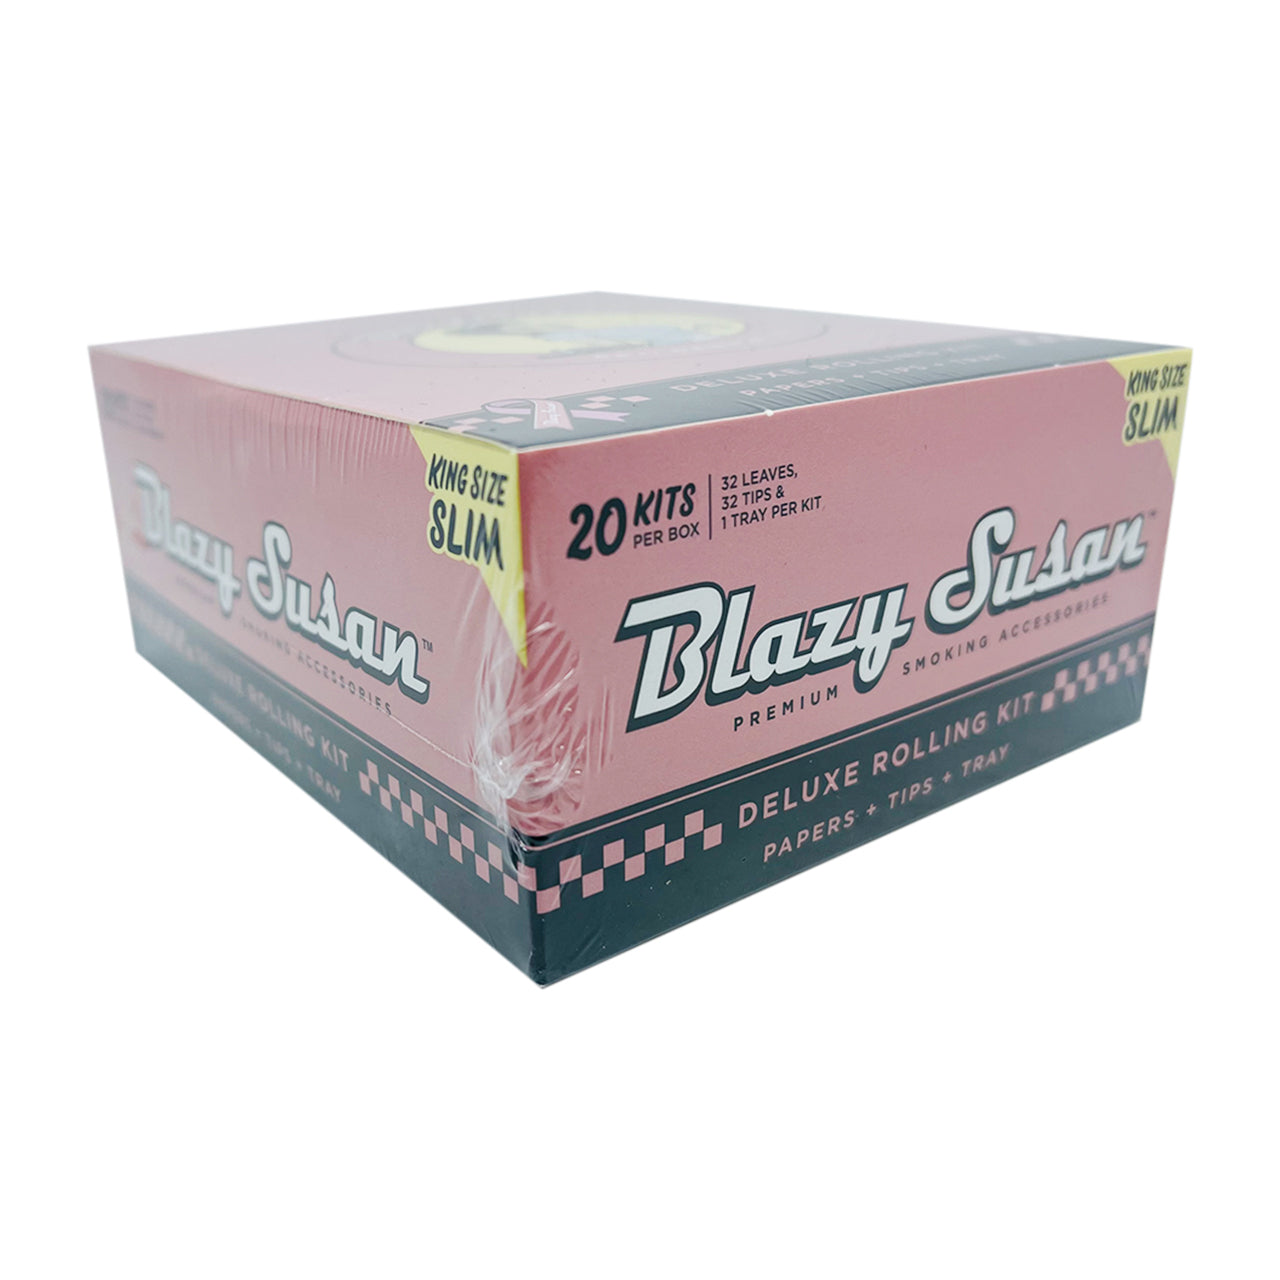 blazy susan deluxe rolling kit pink box